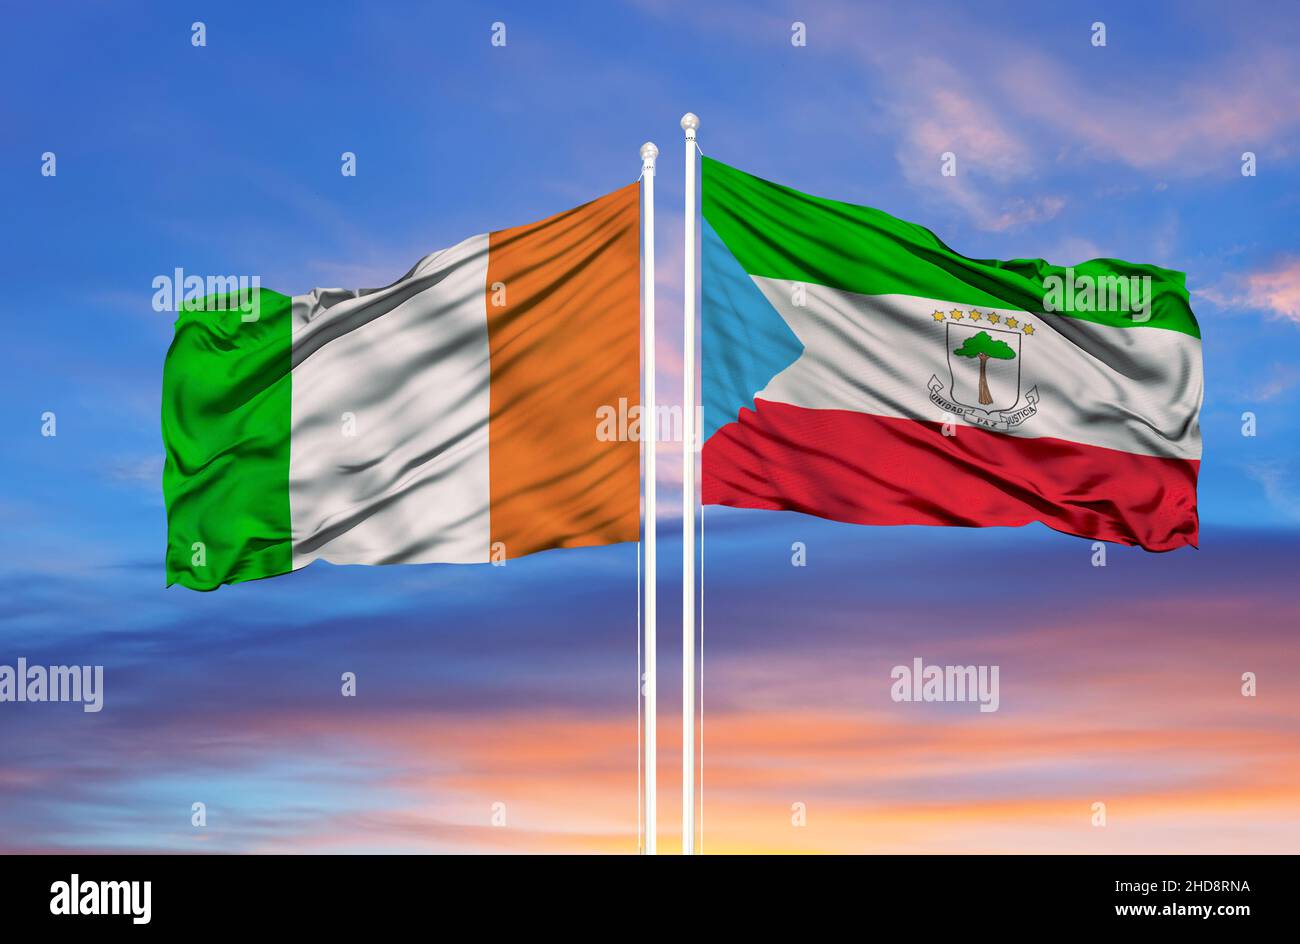 Ivory Coast and Equatorial Guinea two flags on flagpoles and blue cloudy sky Stock Photo